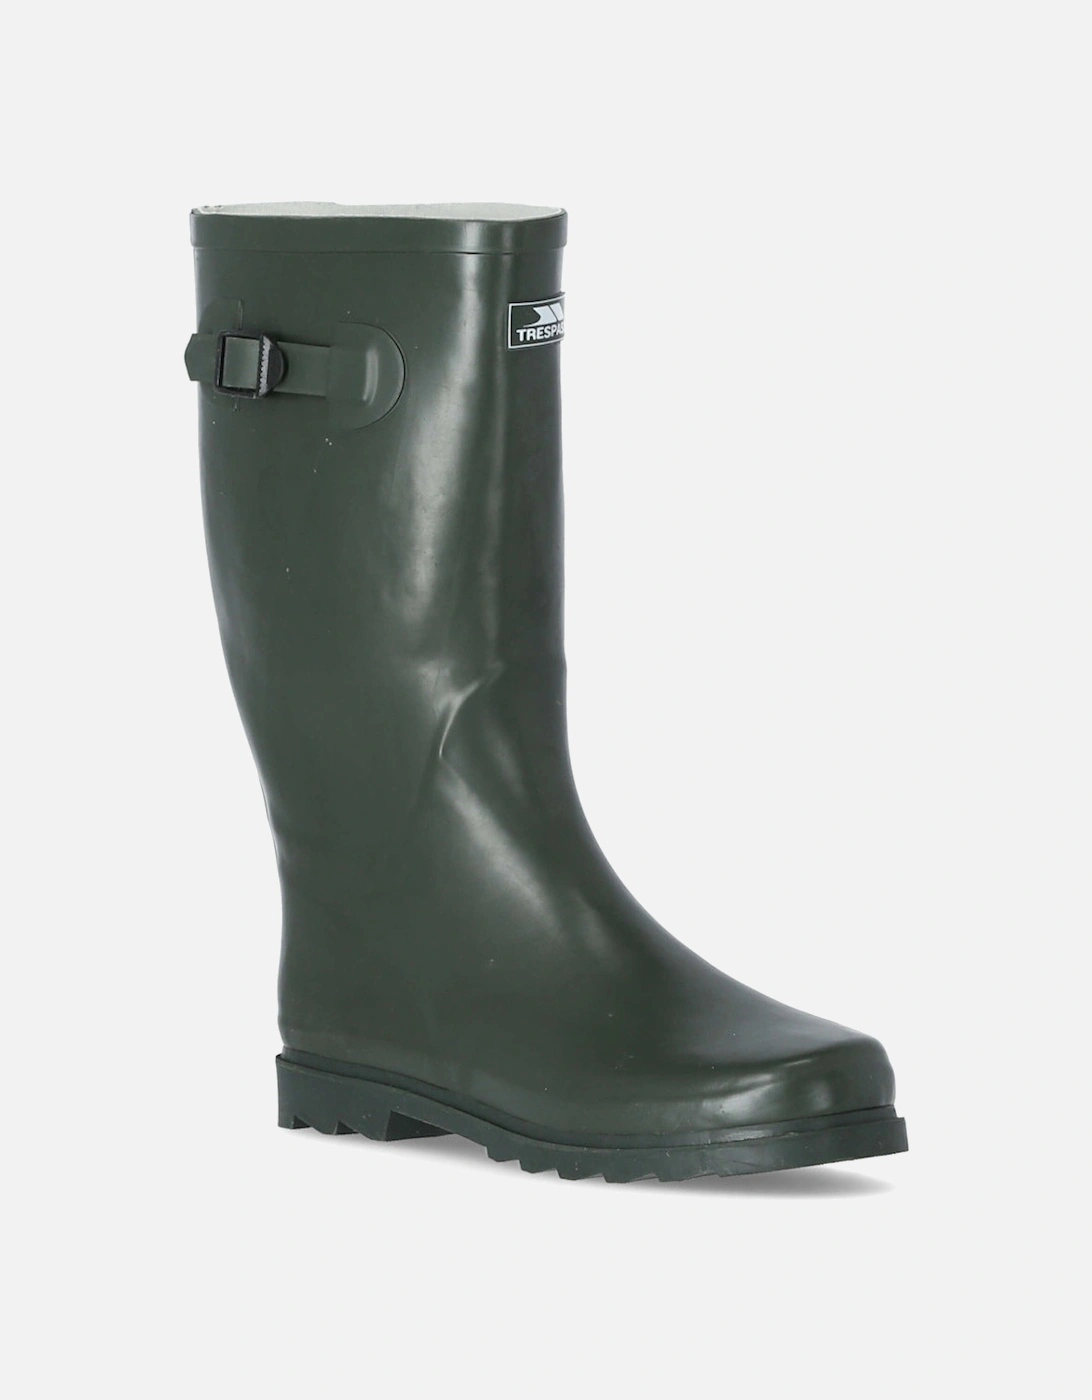 Mens Recon X Waterproof Full Rubber Welly Wellington Boots